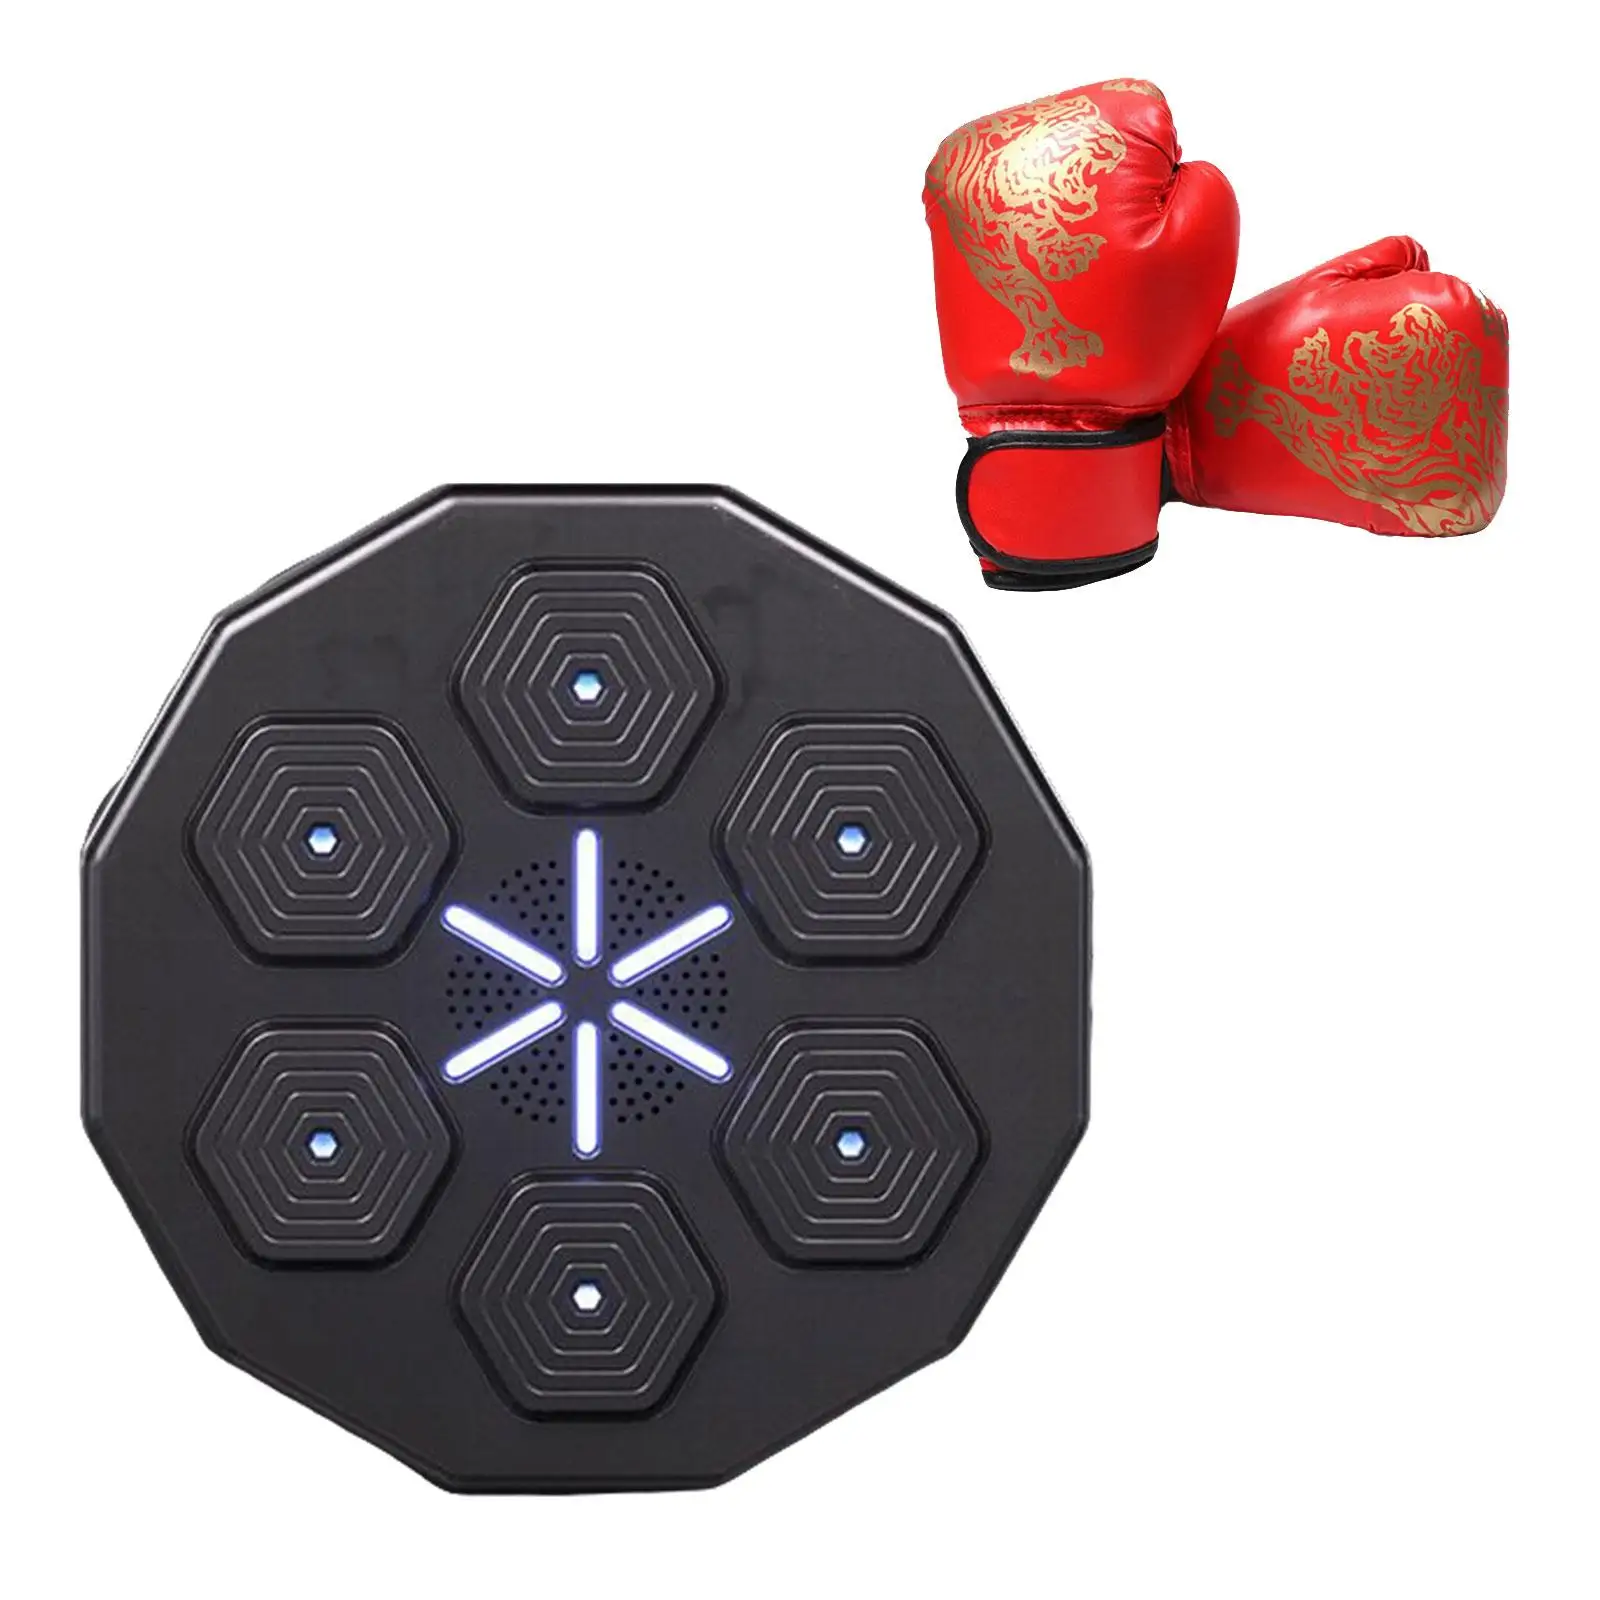 Music Boxing Machine Boxing Training Target for Boxing Improves Perception Martial Arts Reaction Gyms Home